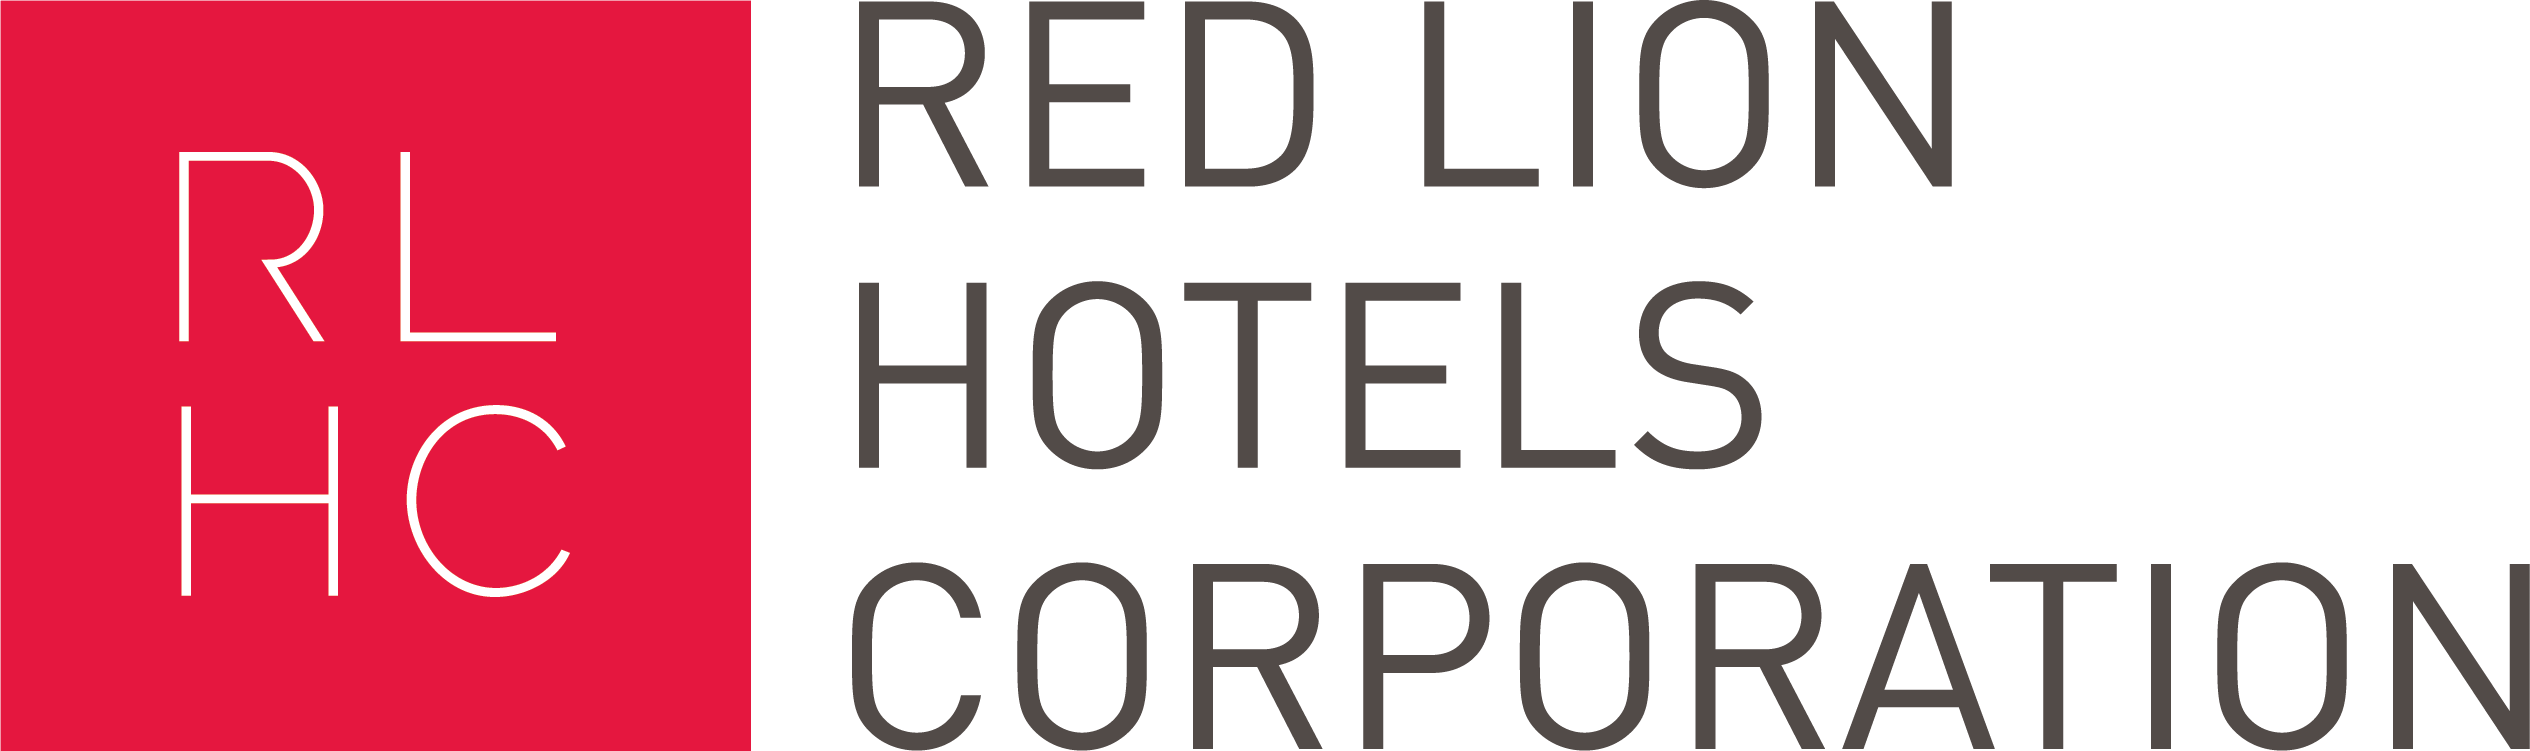 Lion Hotel Logo - Red Lion Hotels Corp logo - No Vacancy